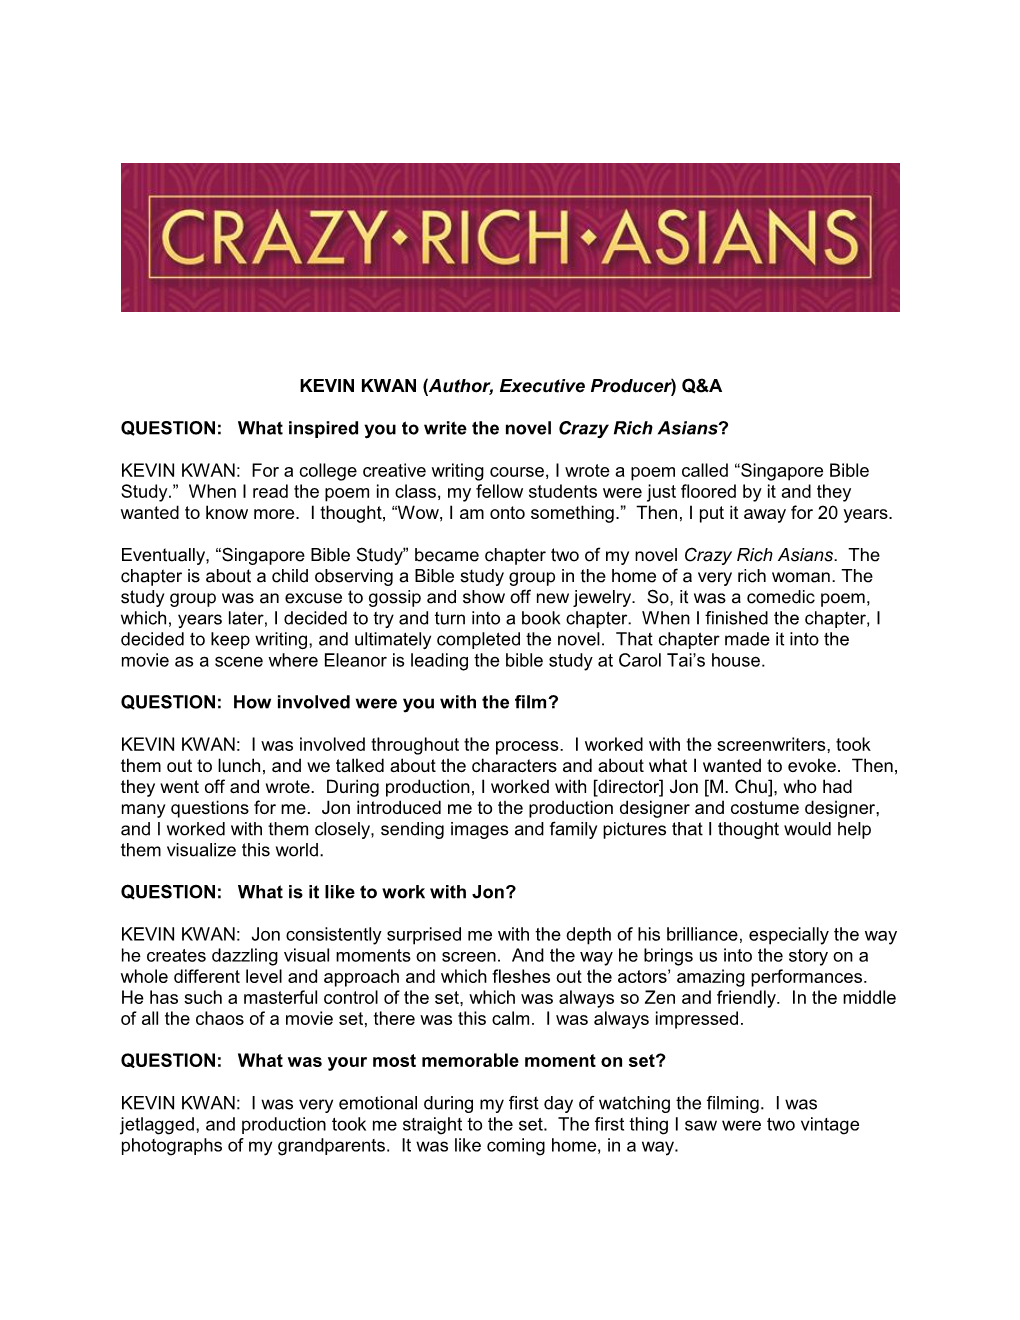 What Inspired You to Write the Novel Crazy Rich Asians? KEVIN KWAN